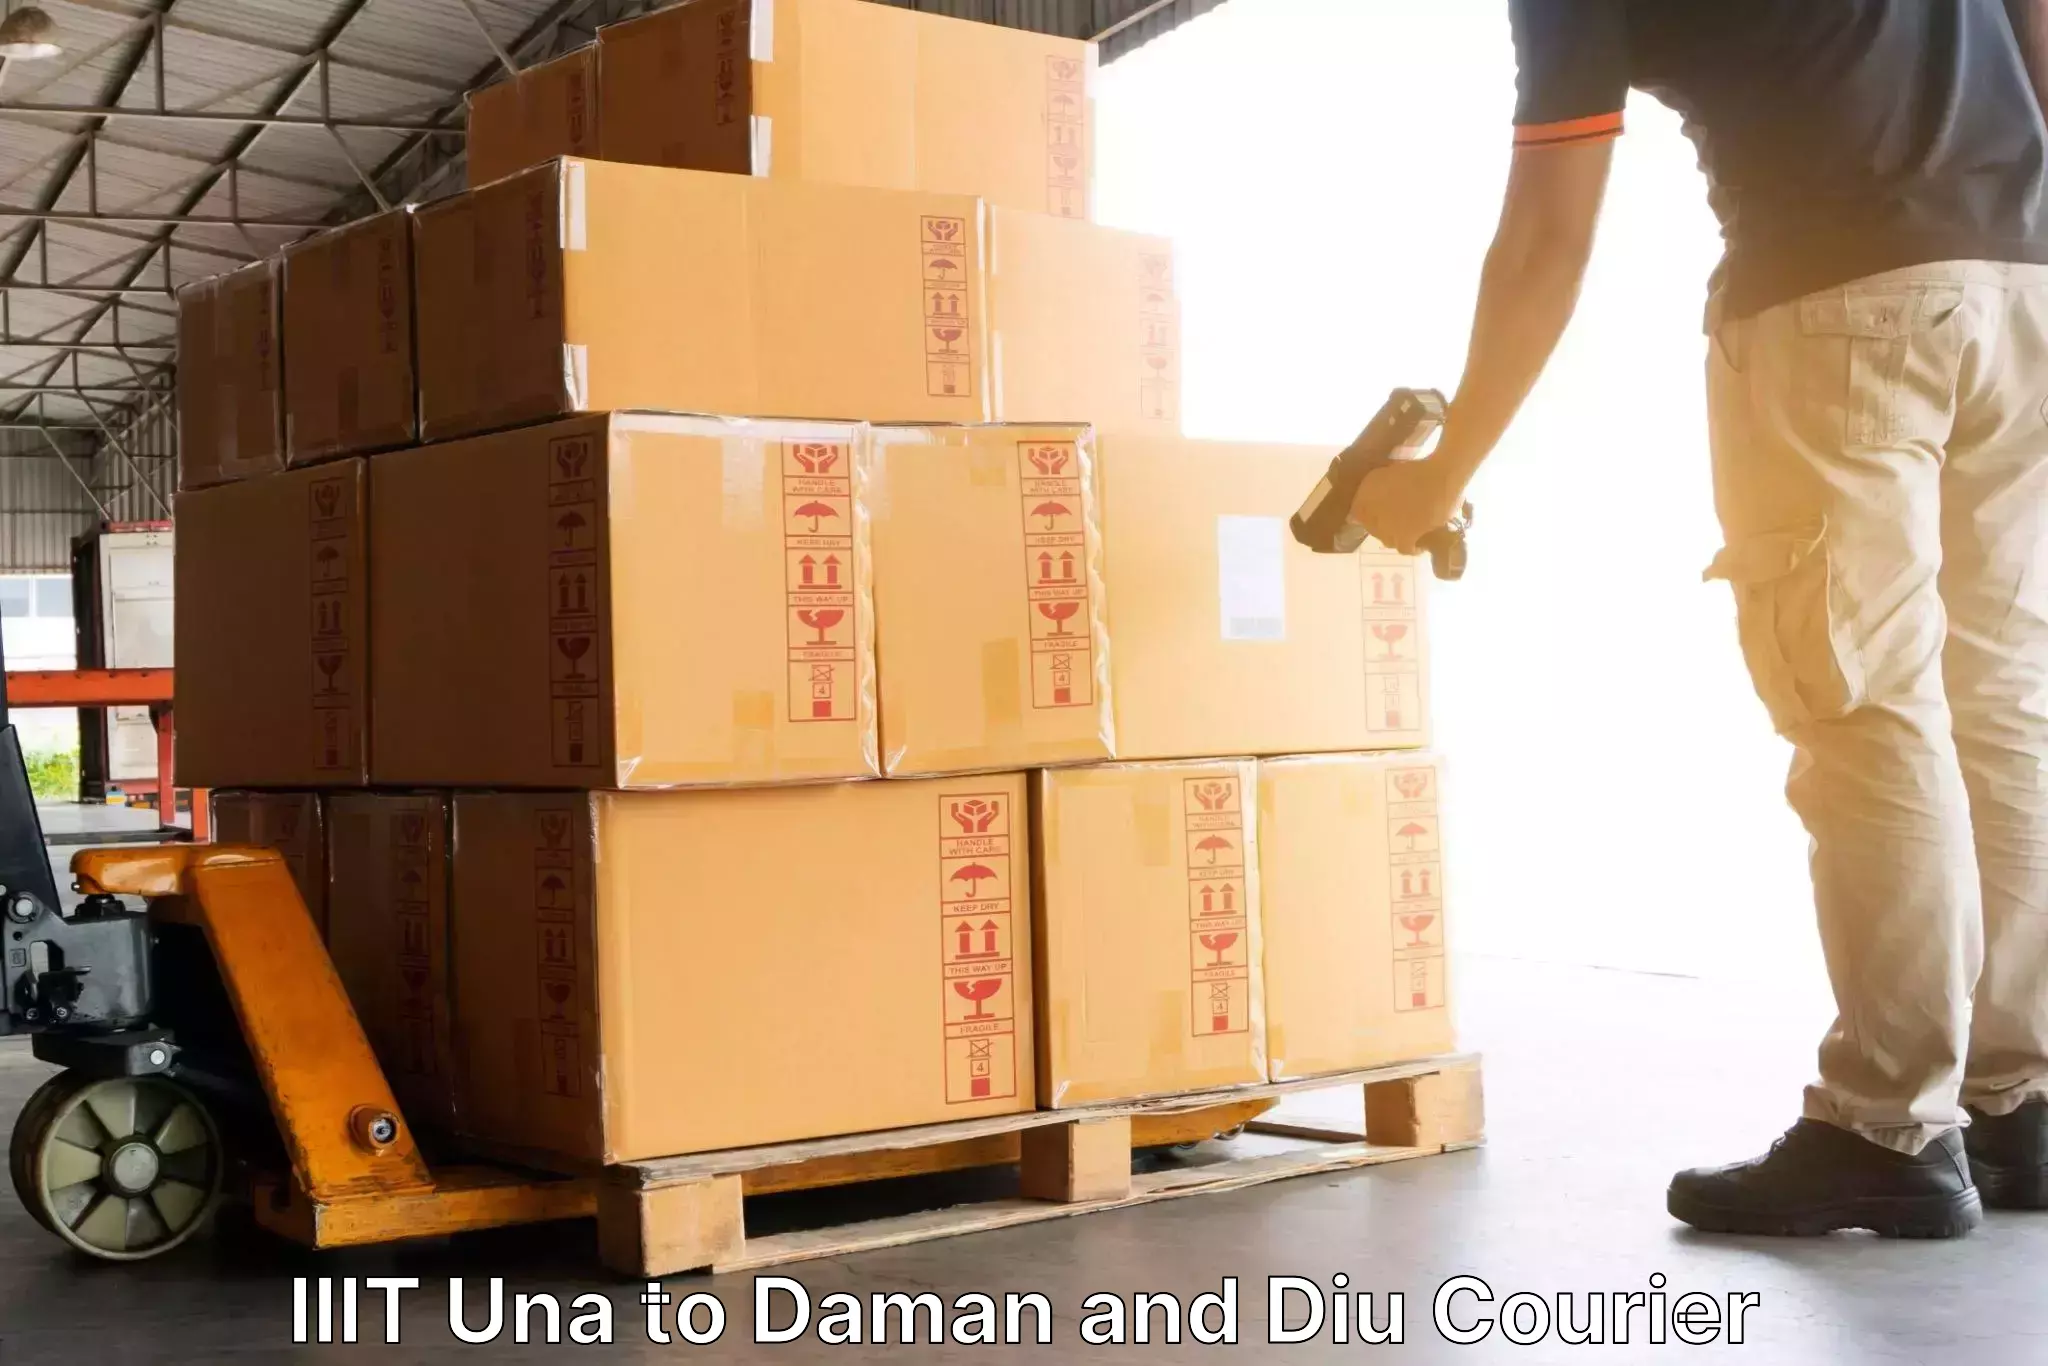 Courier dispatch services IIIT Una to Diu